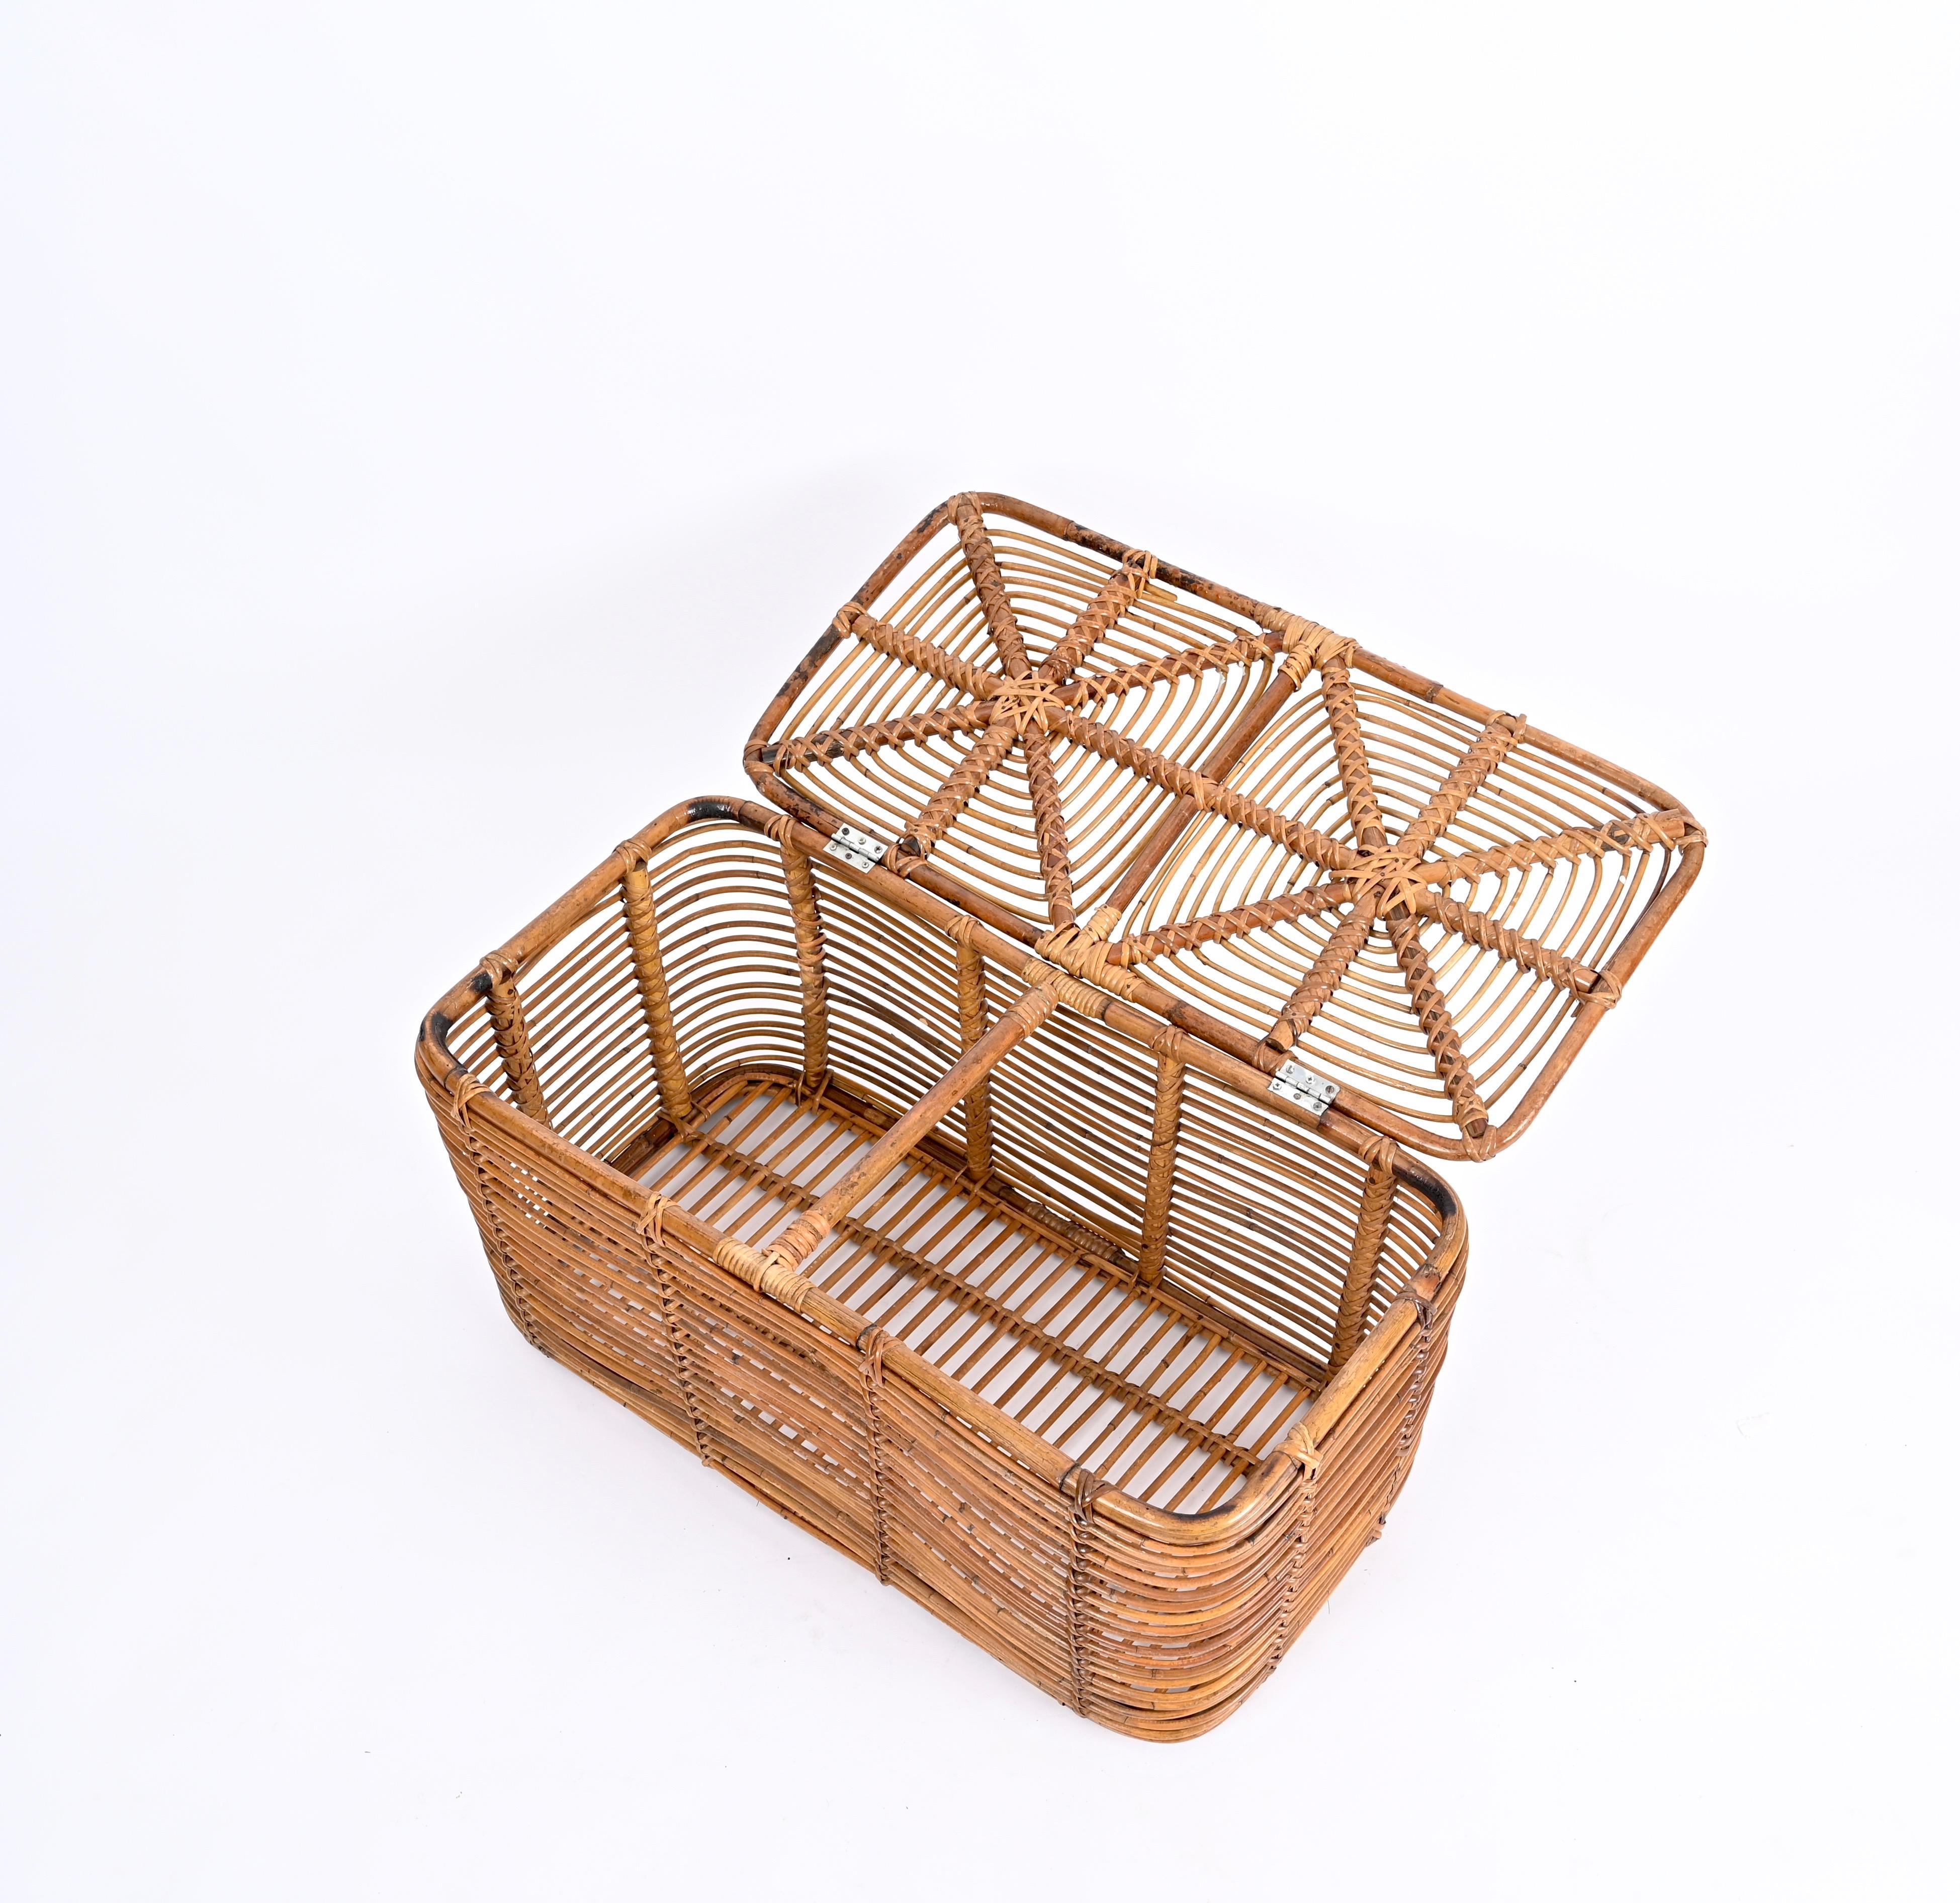 Midcentury French Riviera Bamboo and Woven Rattan Italian Basket, 1960s For Sale 6